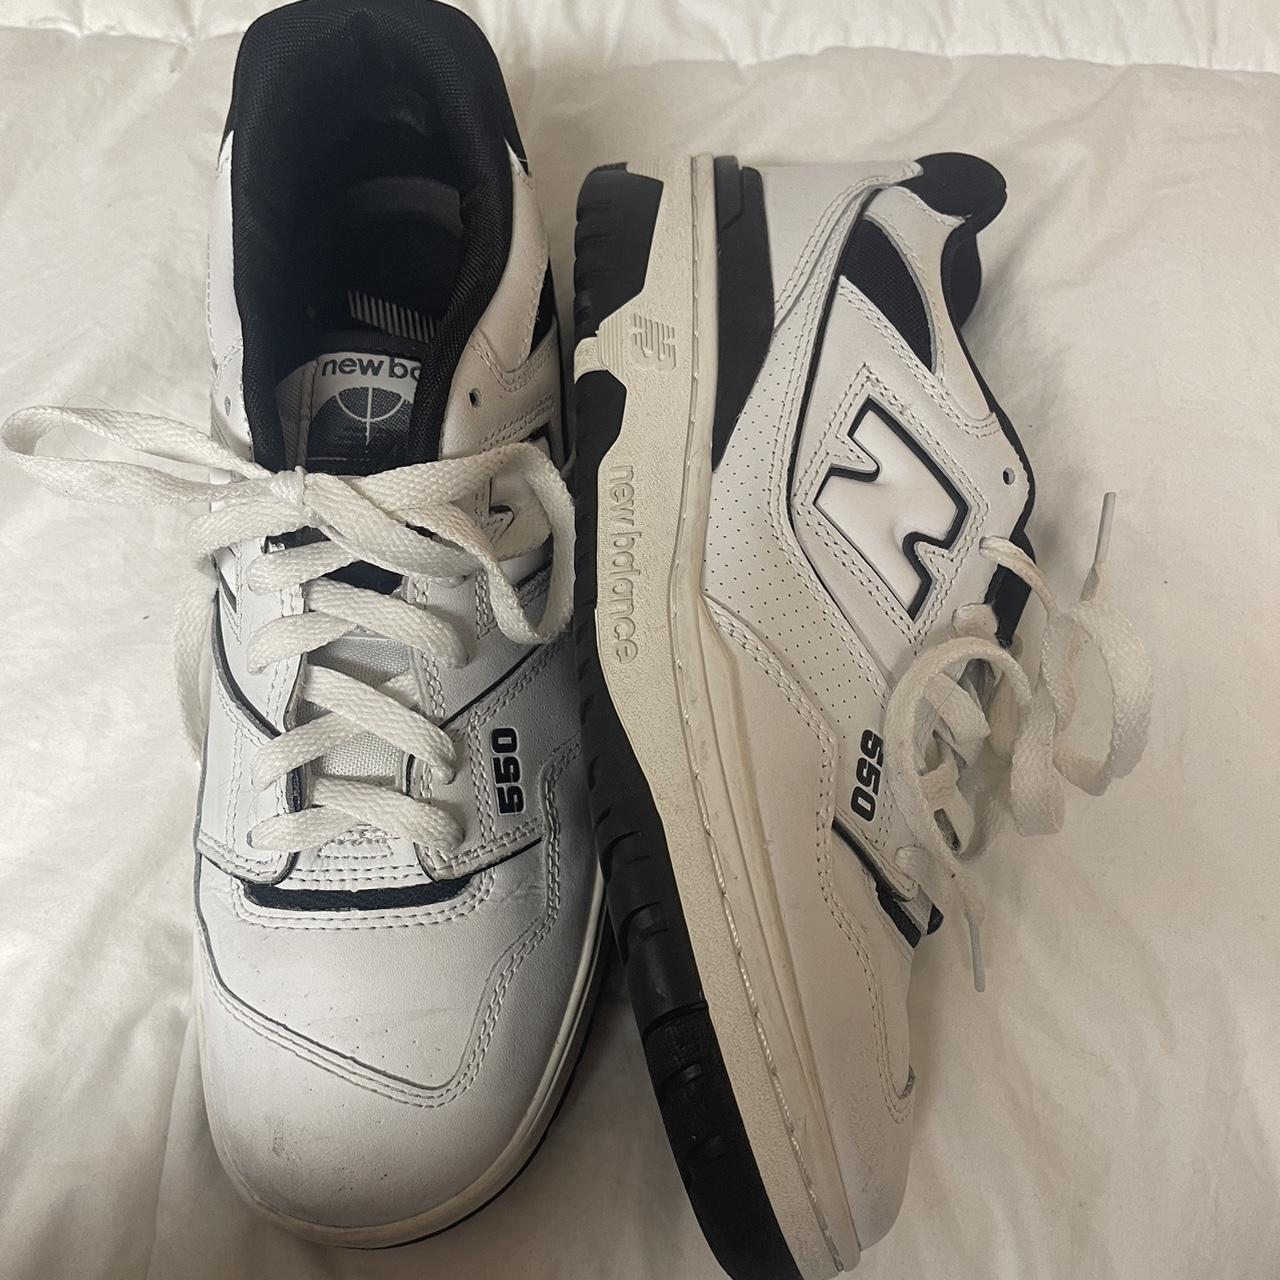 New Balance Women's Black and White Trainers